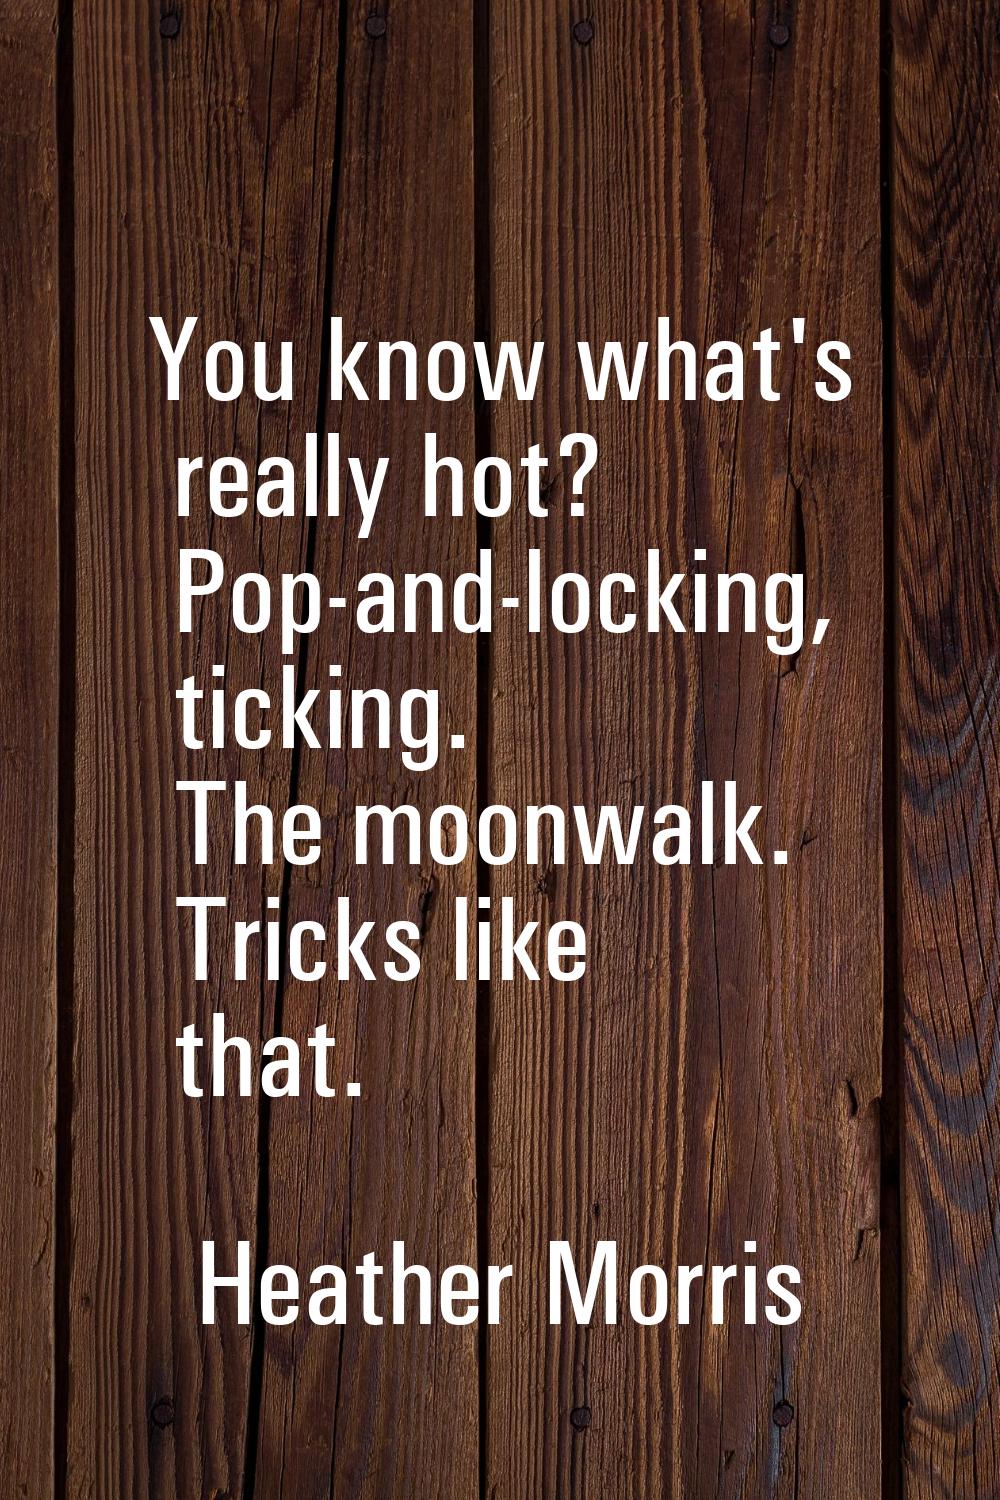 You know what's really hot? Pop-and-locking, ticking. The moonwalk. Tricks like that.